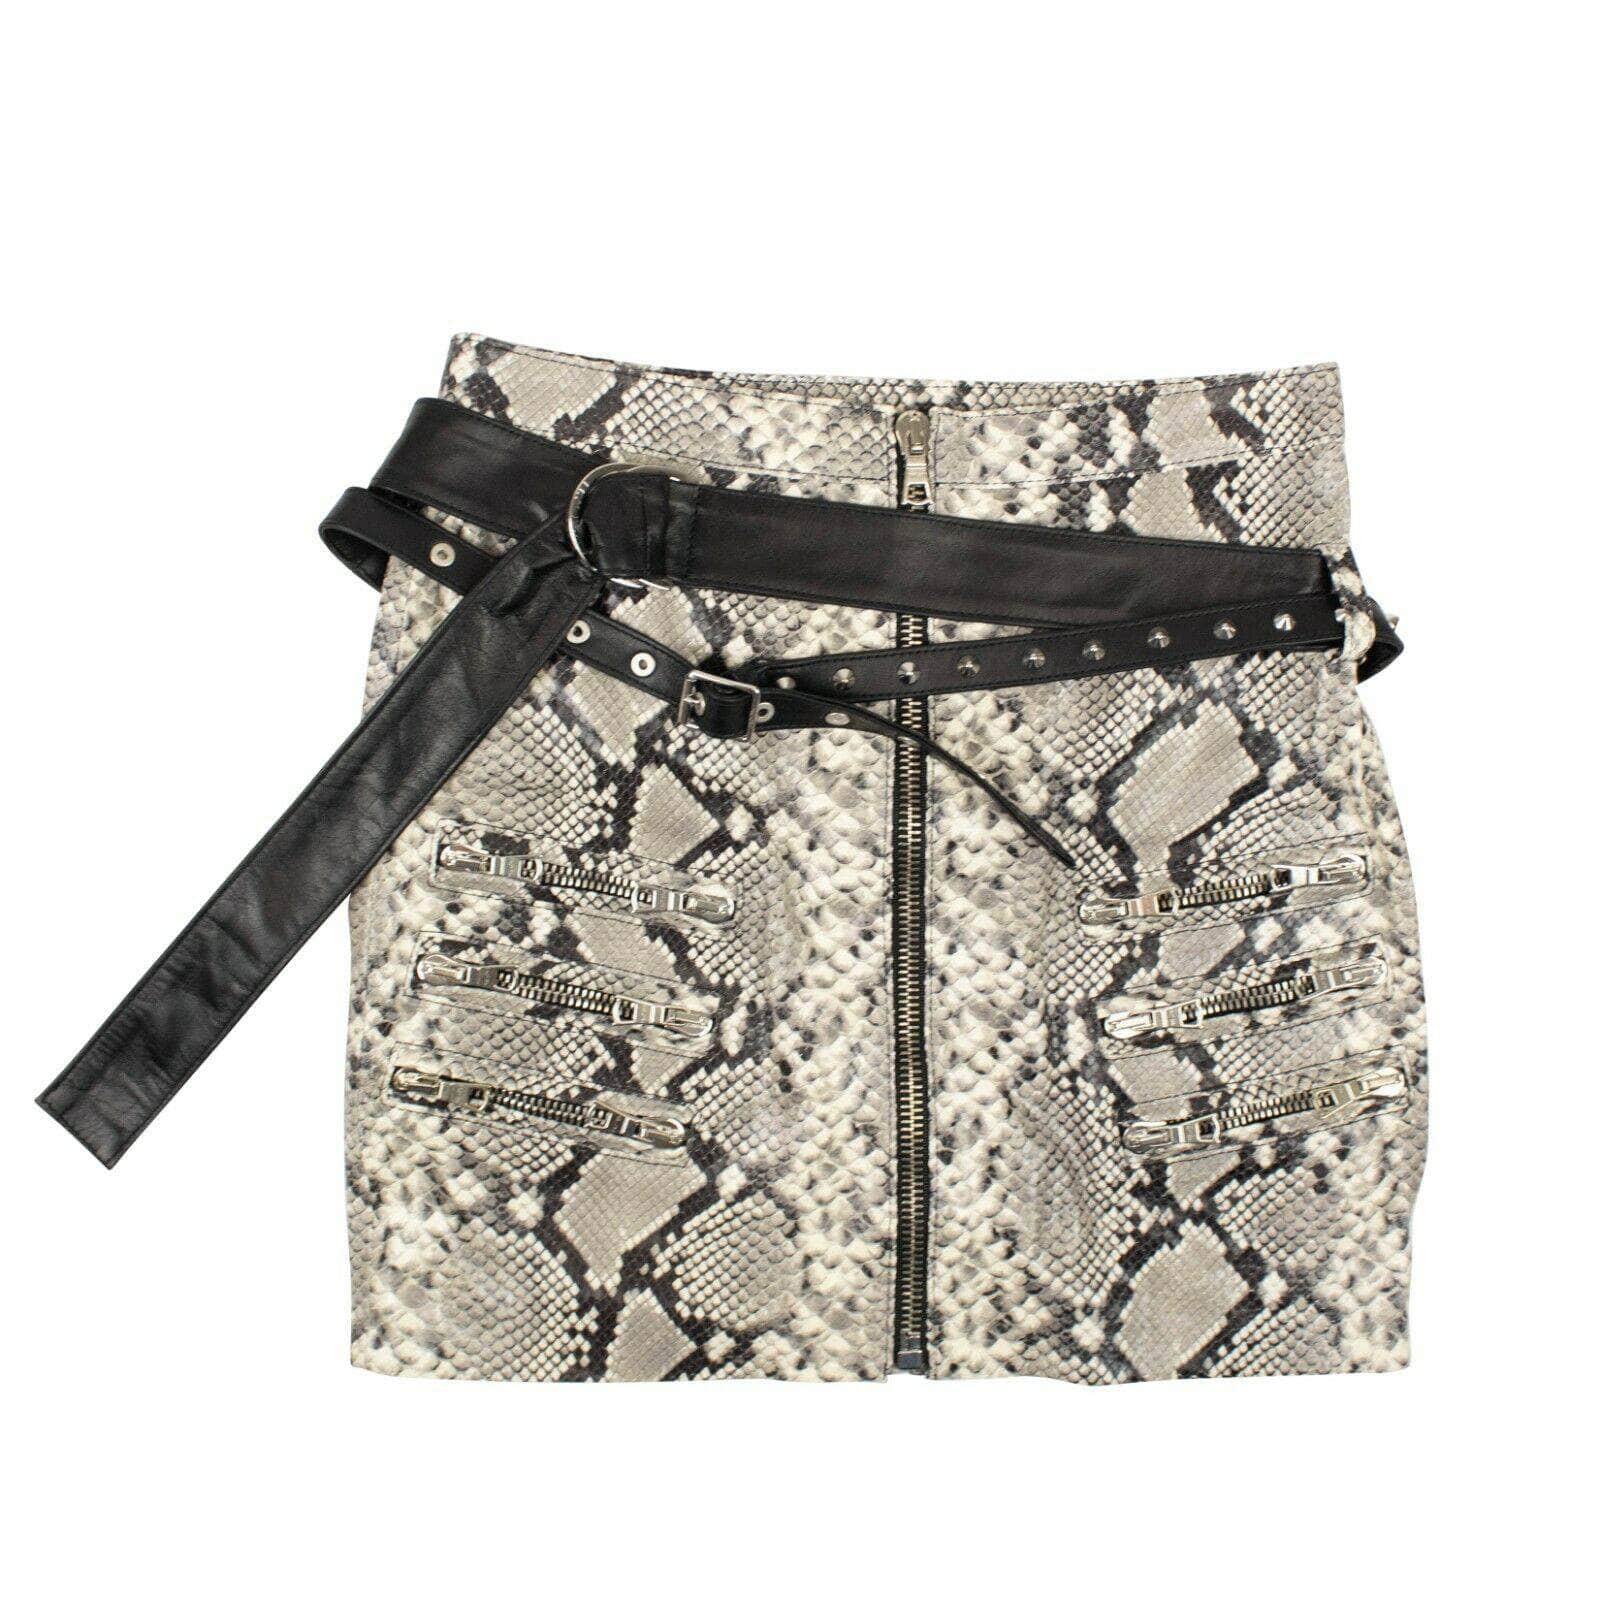 UNRAVEL PROJECT 500-750, channelenable-all, couponcollection, gender-womens, main-clothing, sale-enable, size-40, size-42, unravel-project, womens-pencil-skirts Gray Leather Snakeskin Print Mini Skirt